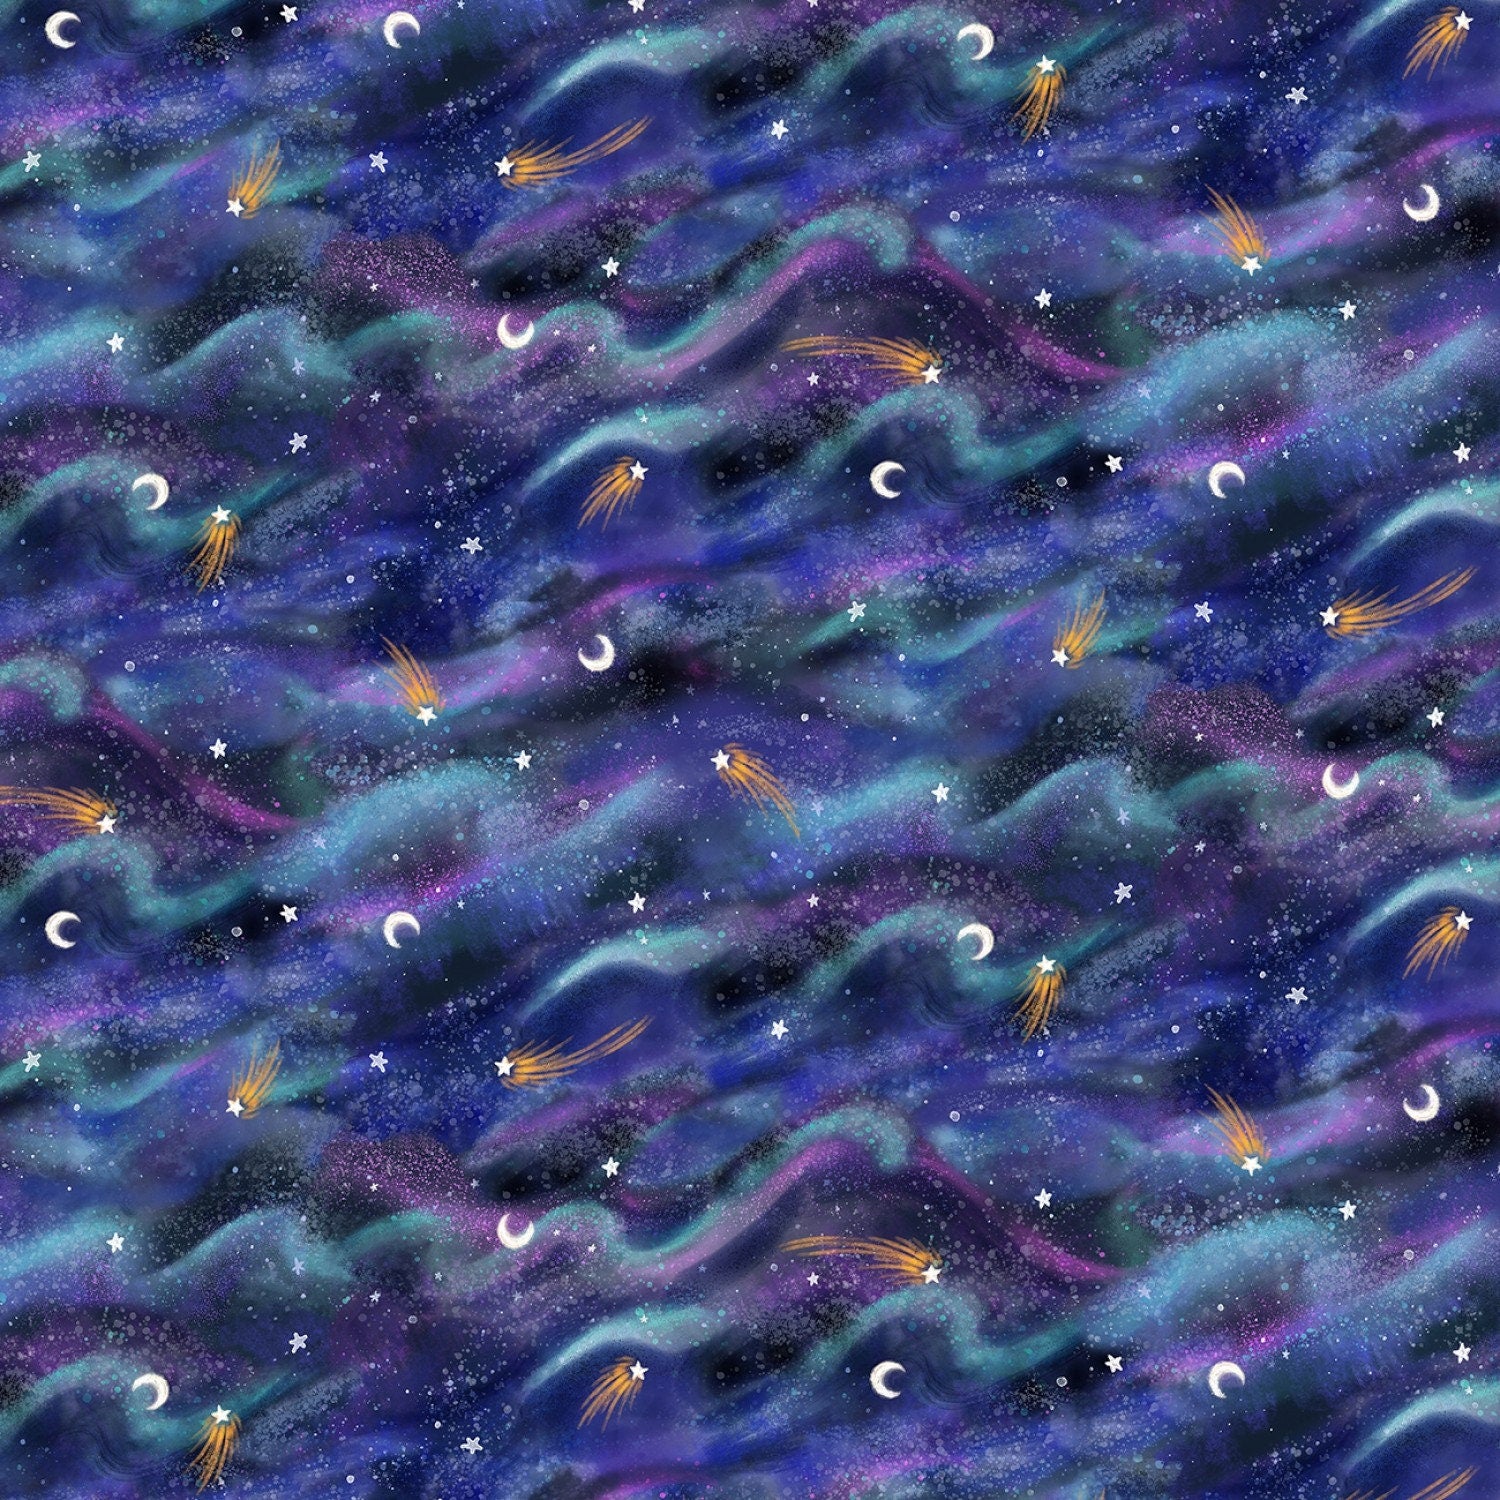 High Quality Quilt Fabric- Sold by the Yard- Timeless Treasures-Artic Nights-100% Cotton Fabric